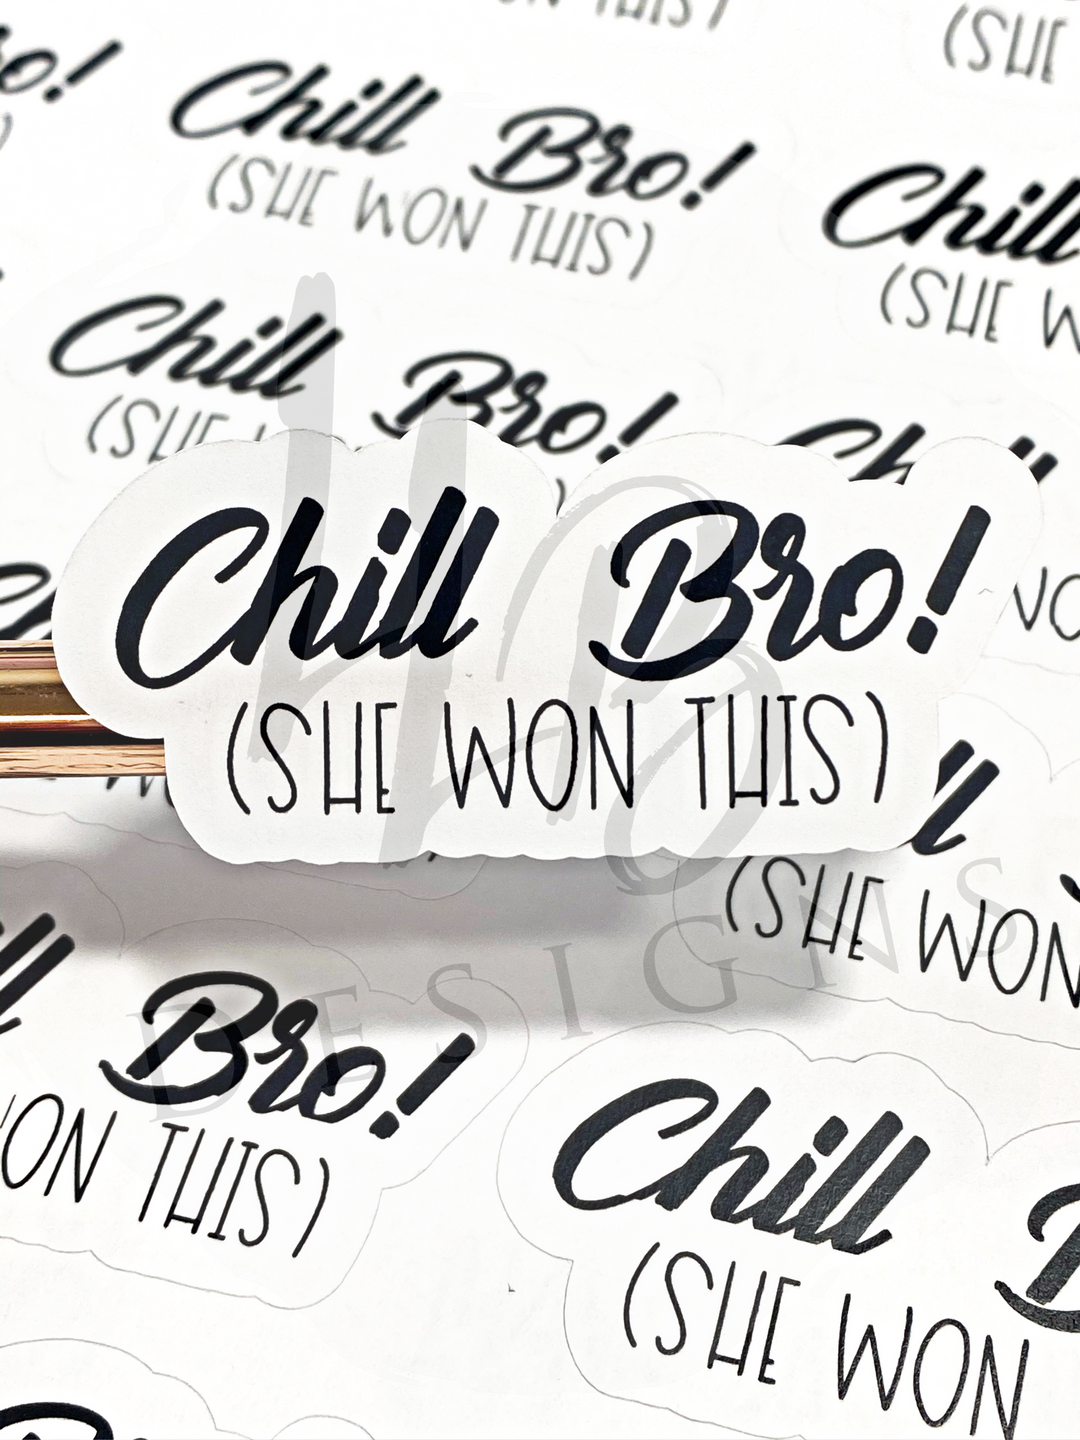 Chill Bro - She Won This   | Thank You For Shopping Small | 2 Inch Die Cut Sticker | Small Business Branding | Packaging Sticker | Foil Sticker #: FS15 | Made To Order